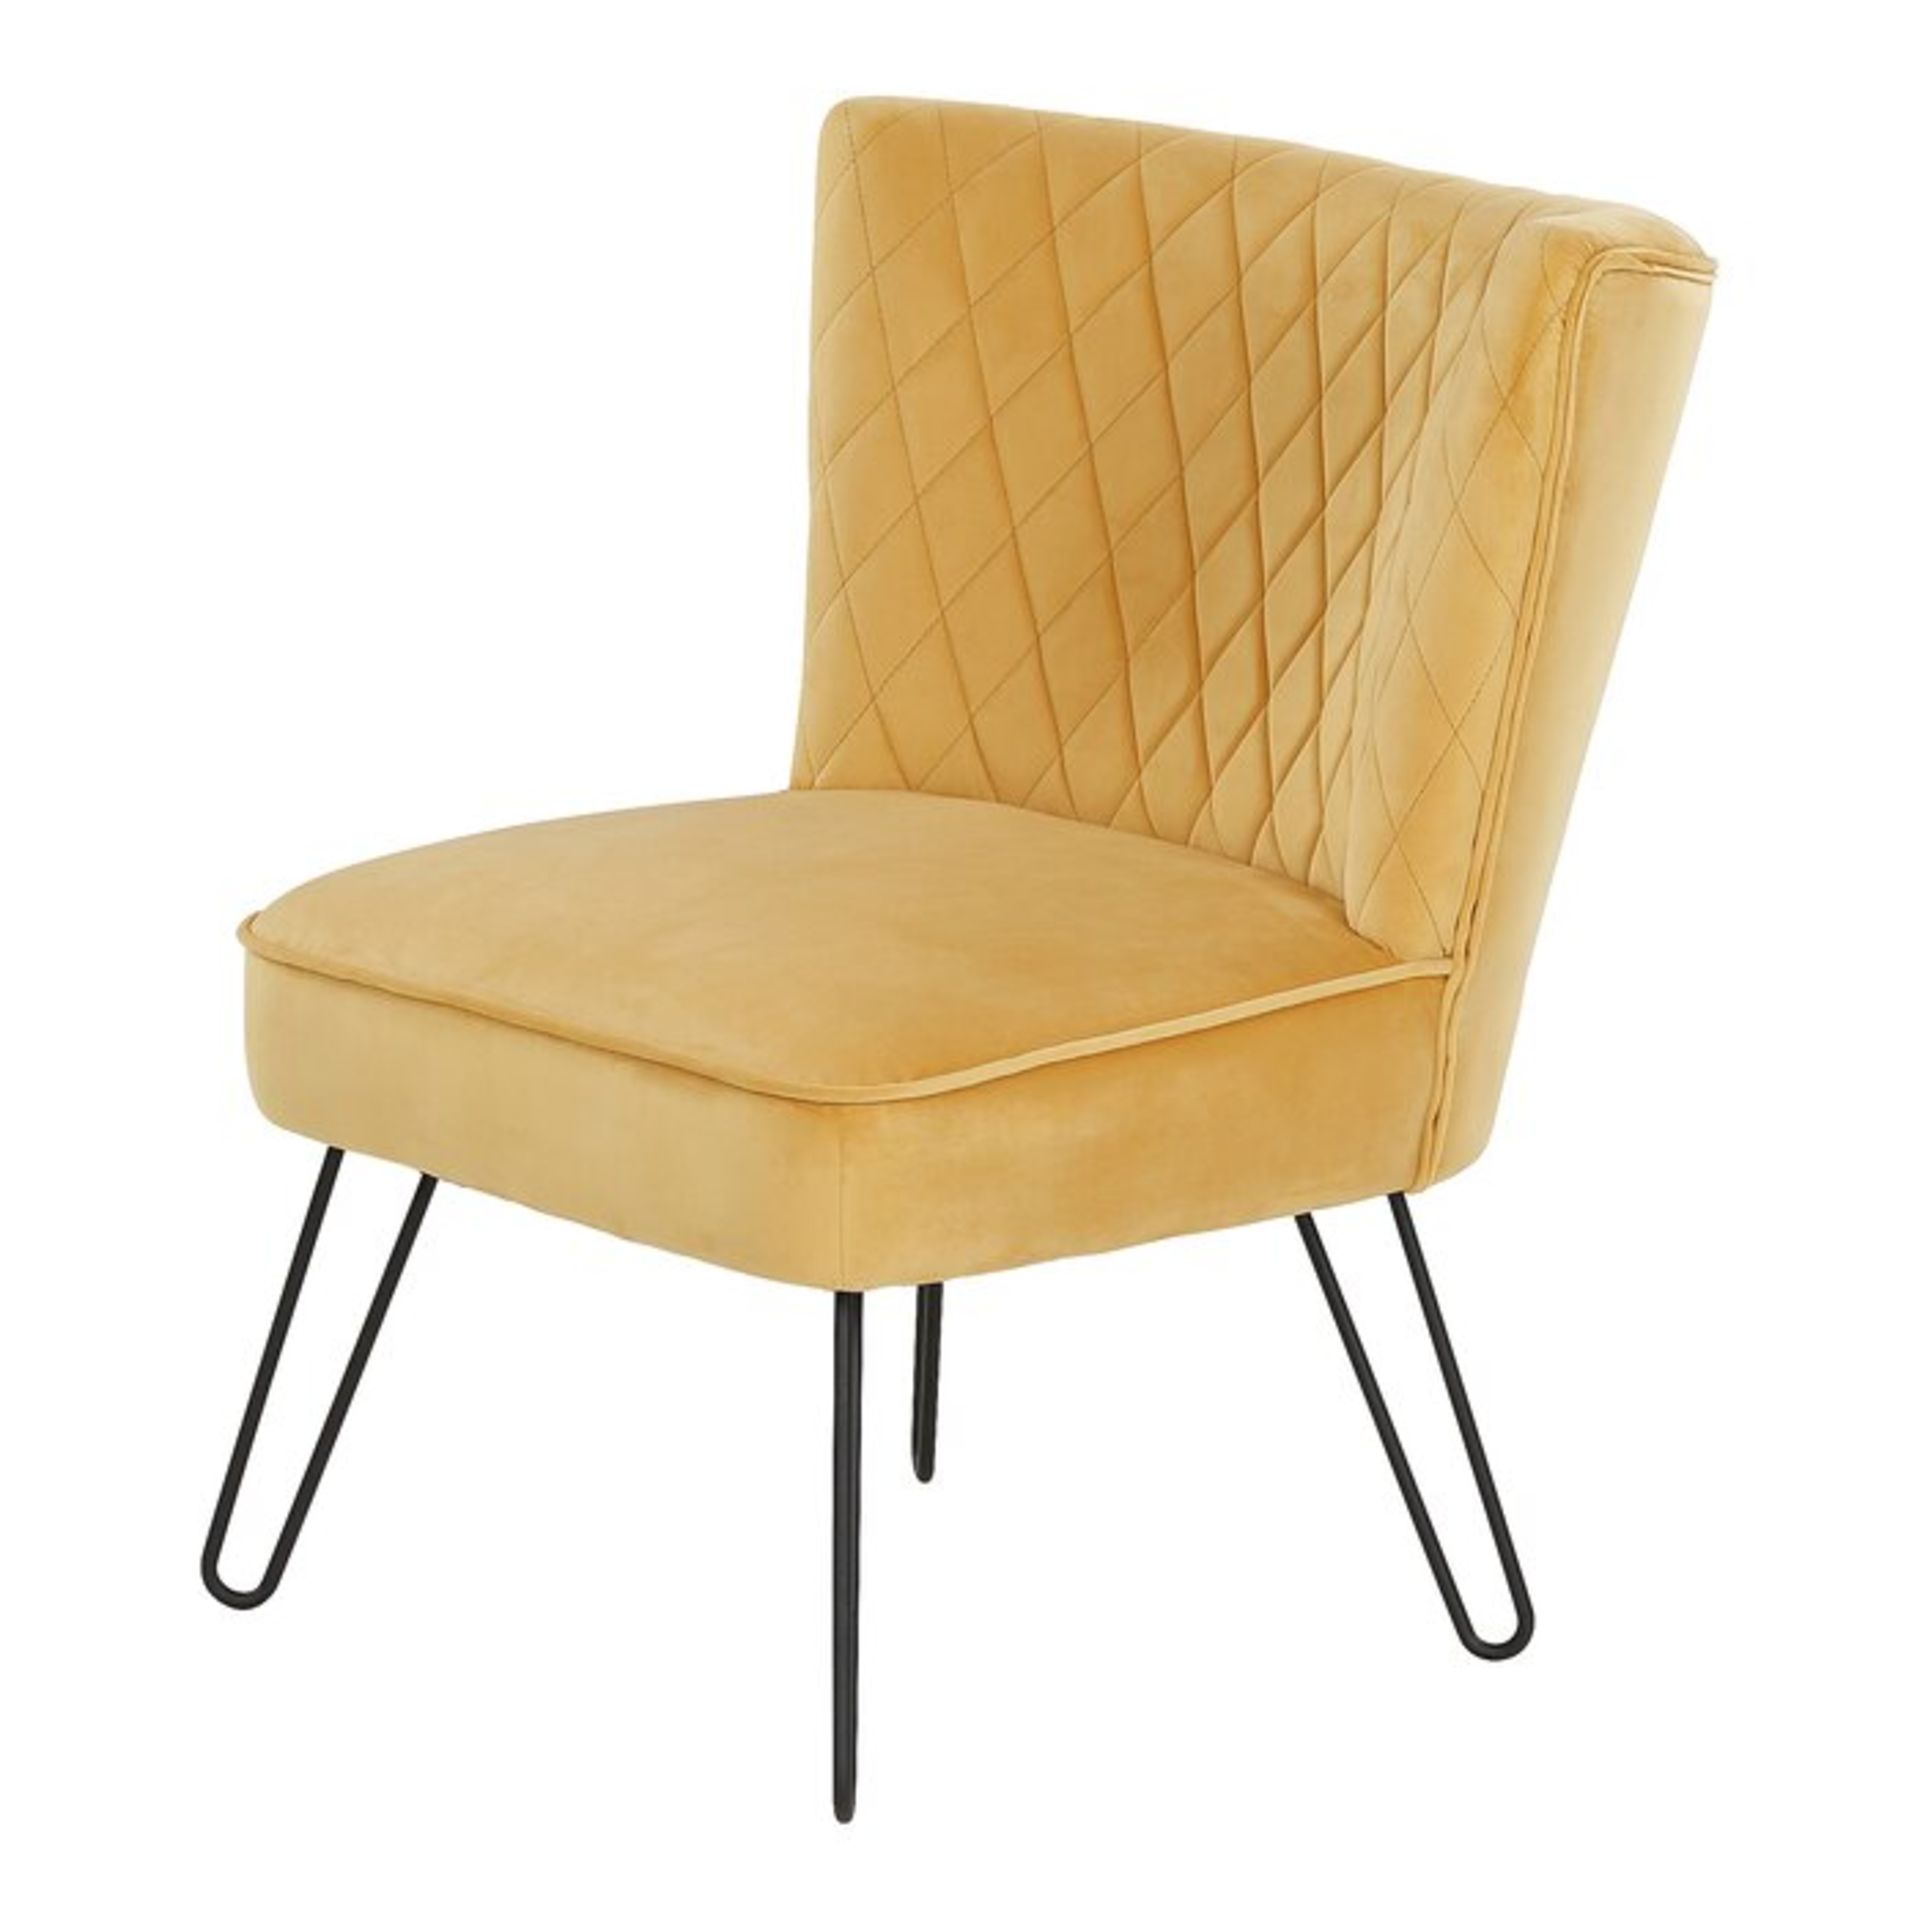 Cocktail Chair - RRP £180.00